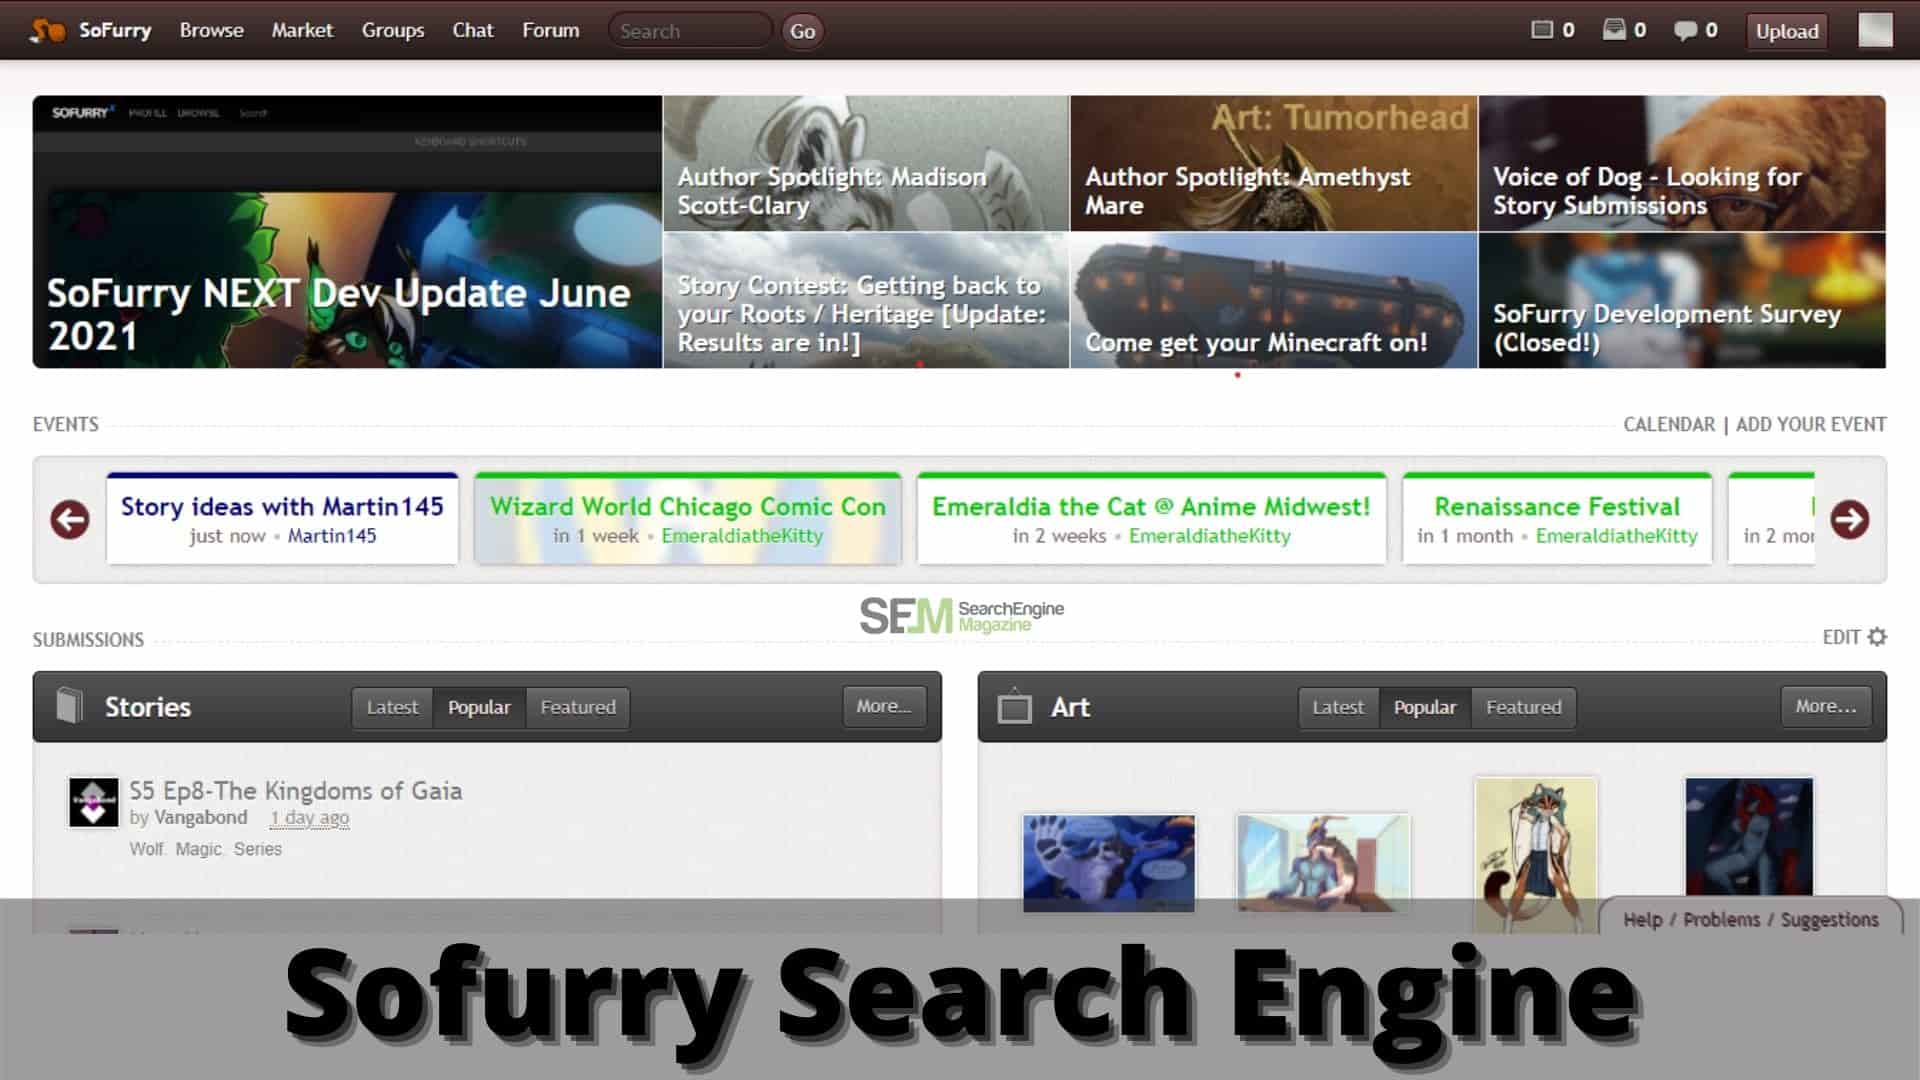 Sofurry Search Engine